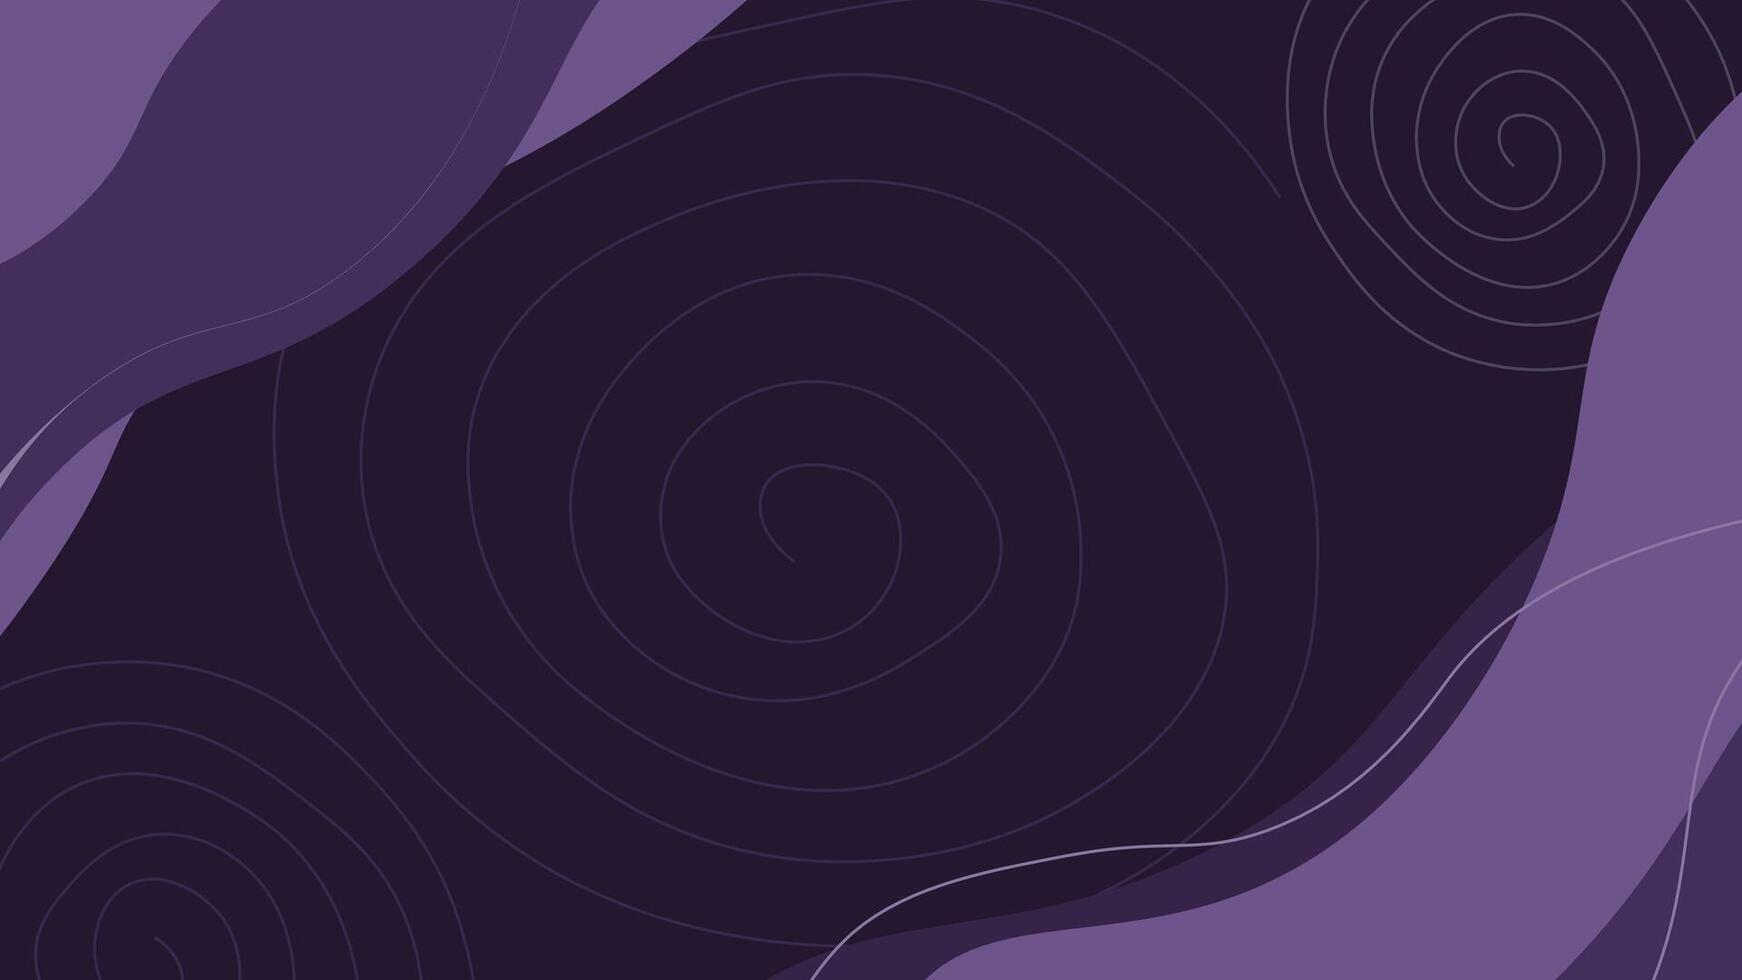 Abstract dark purple background curve decoration vector